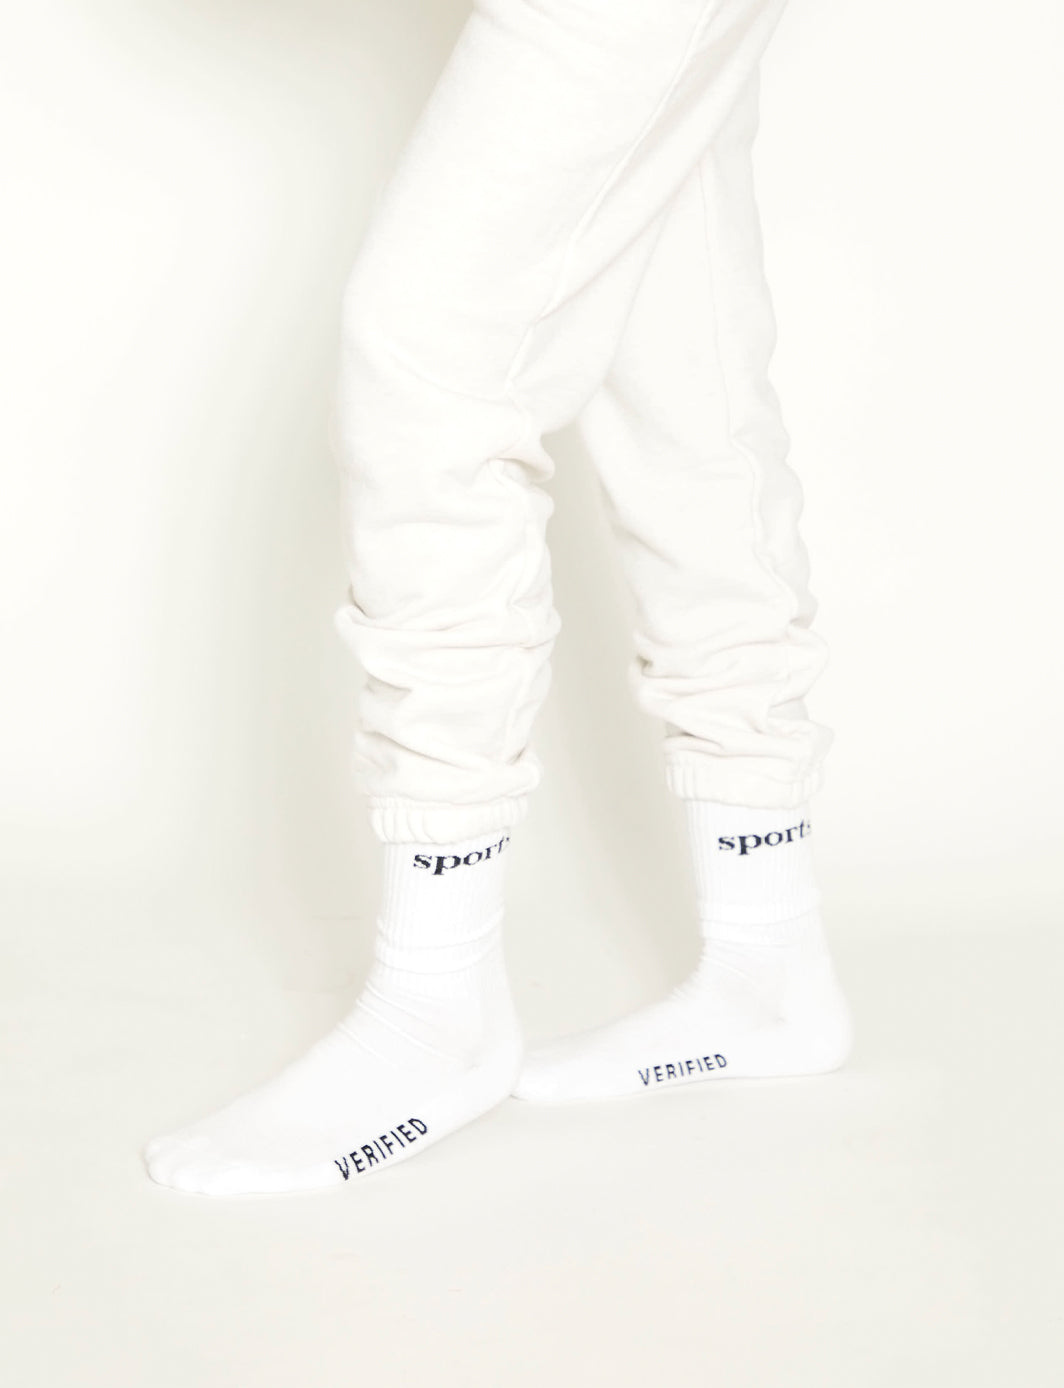 Sports Socks - White with Black Text